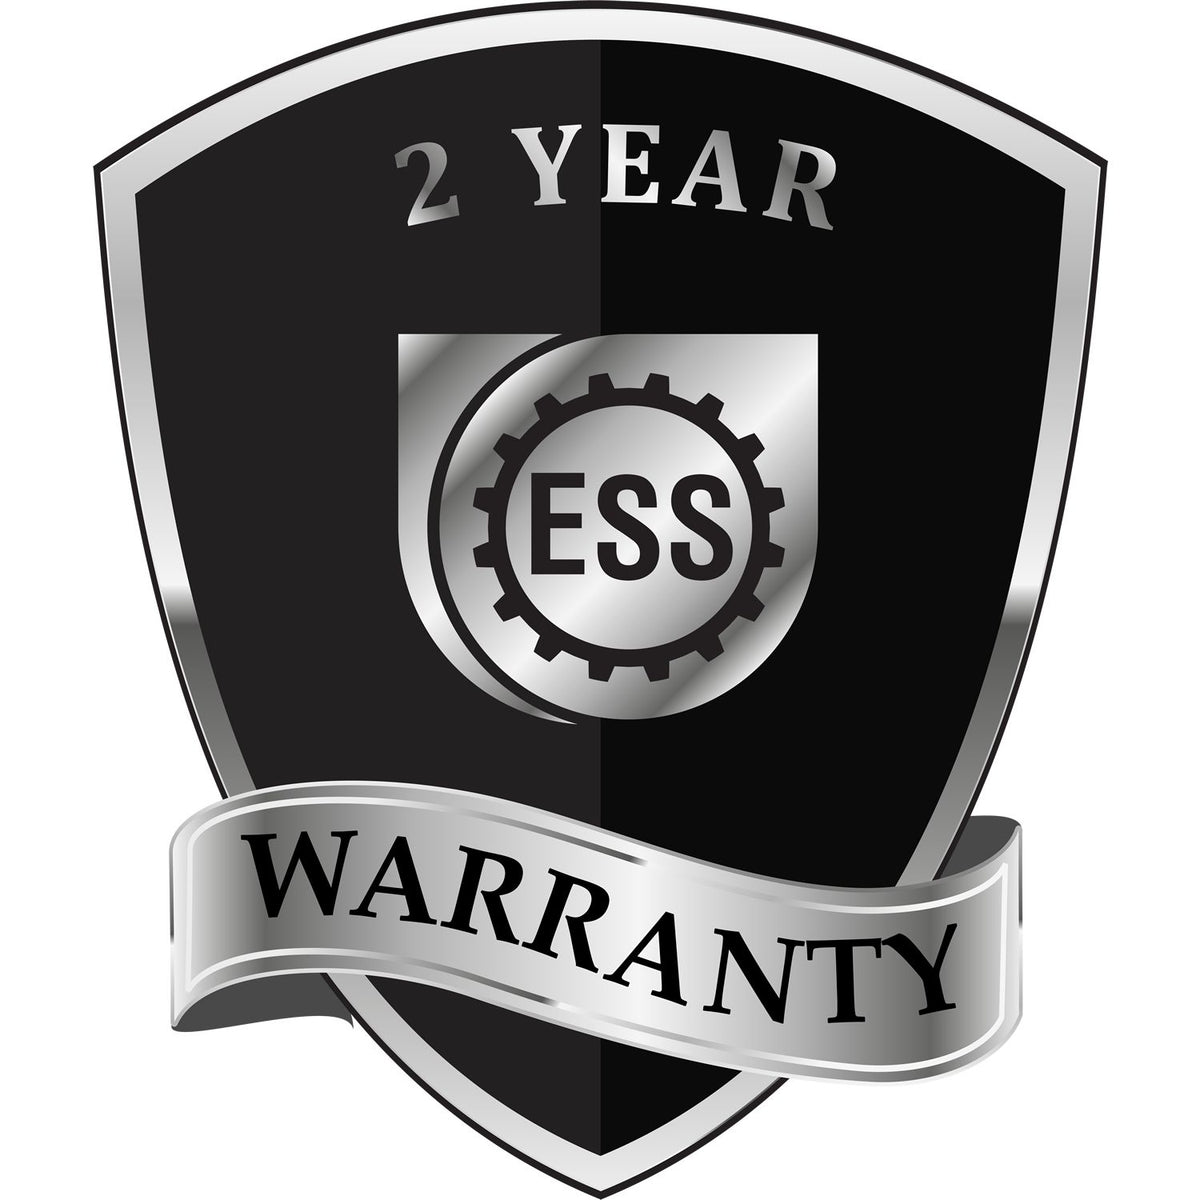 A black and silver badge or emblem showing warranty information for the Long Reach Tennessee Geology Seal